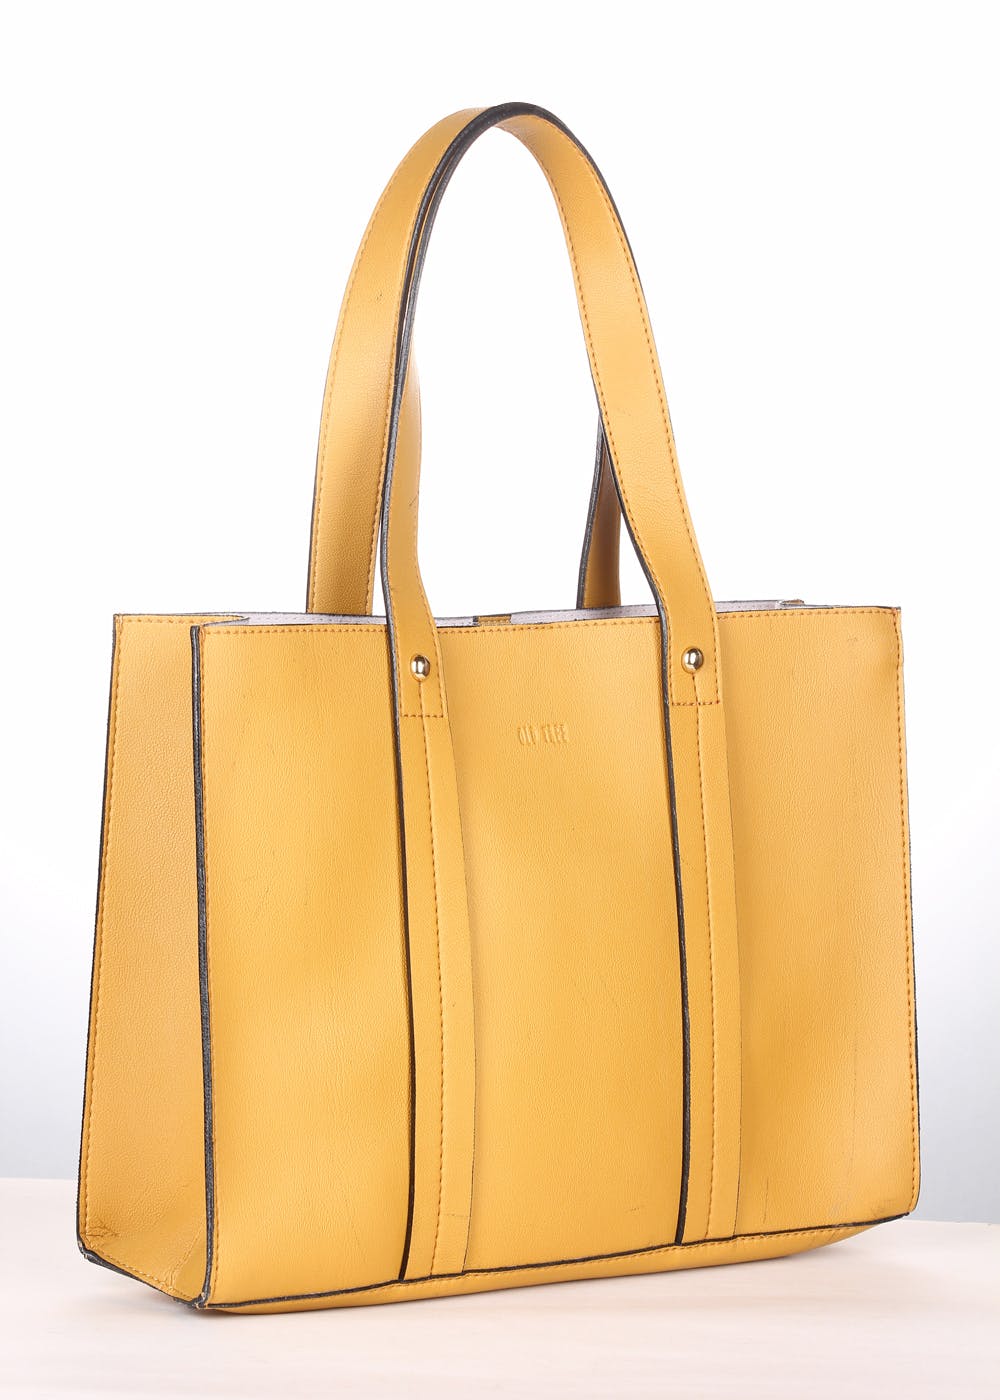 Oval Shape Glossy Finished Tote w/ Wrist Handles (Mustard